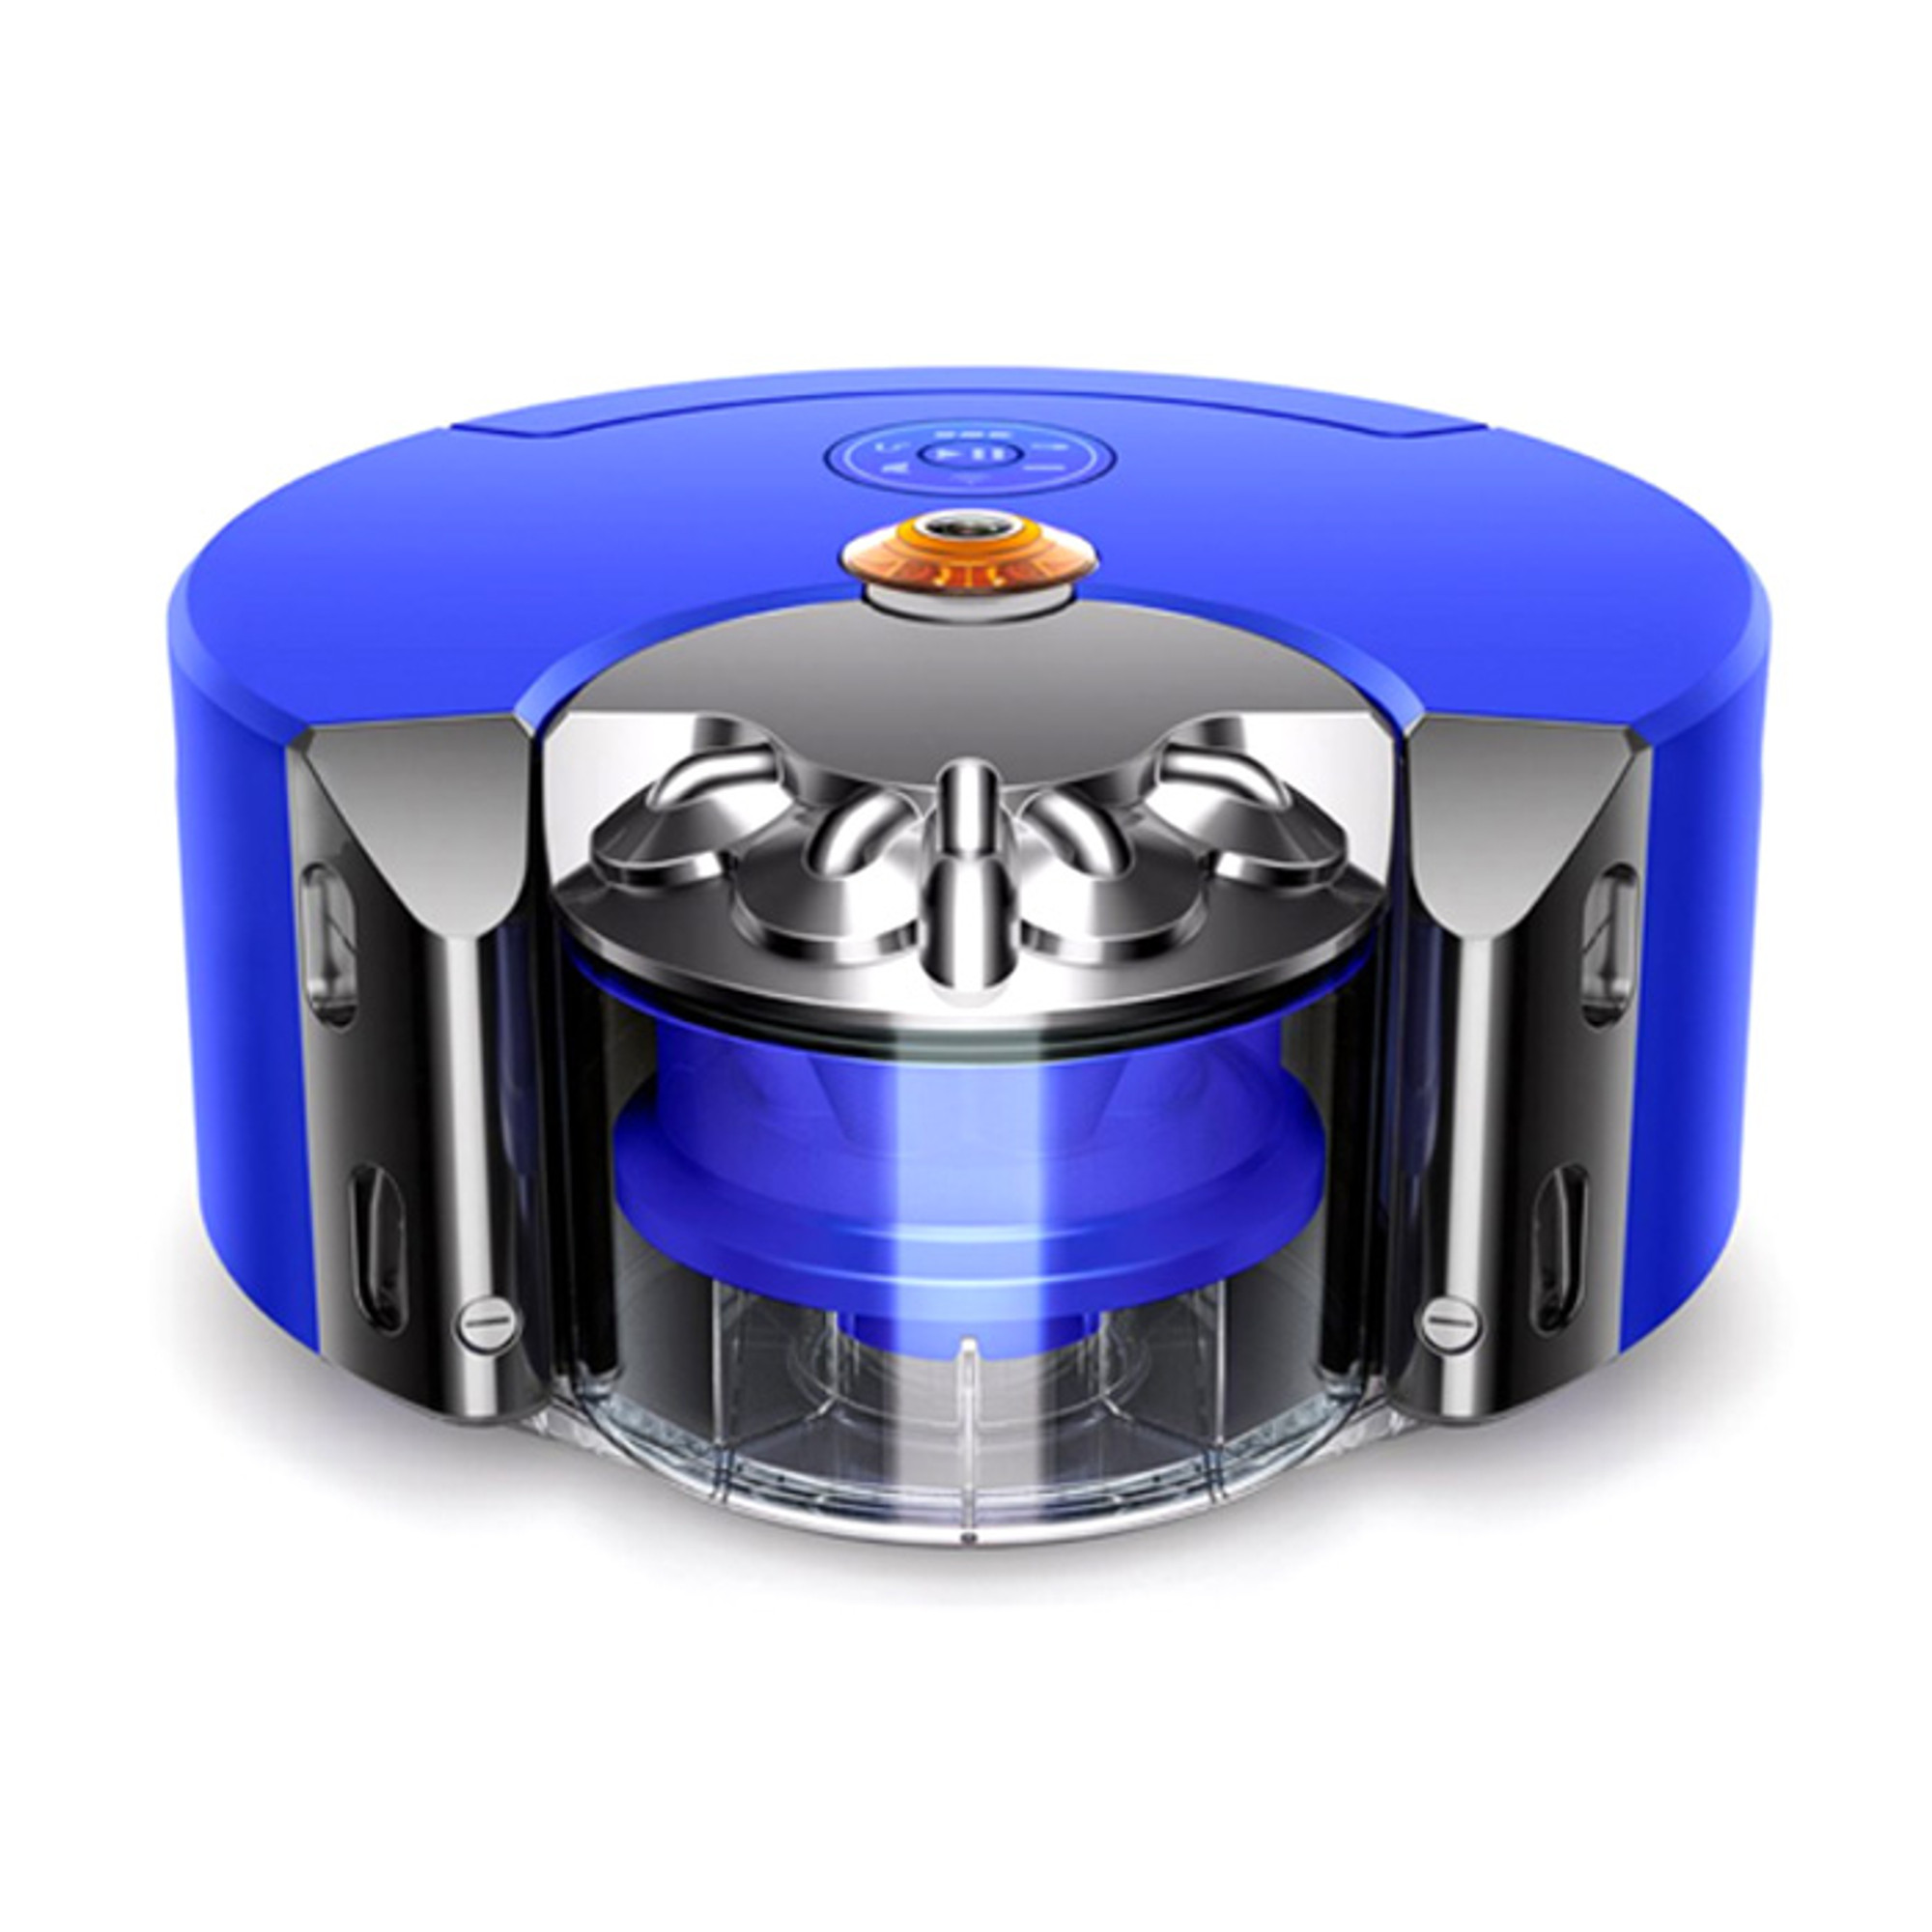 Buy Dyson 360 Heurist Robot Cleaner from Canada at McHardyVac.com